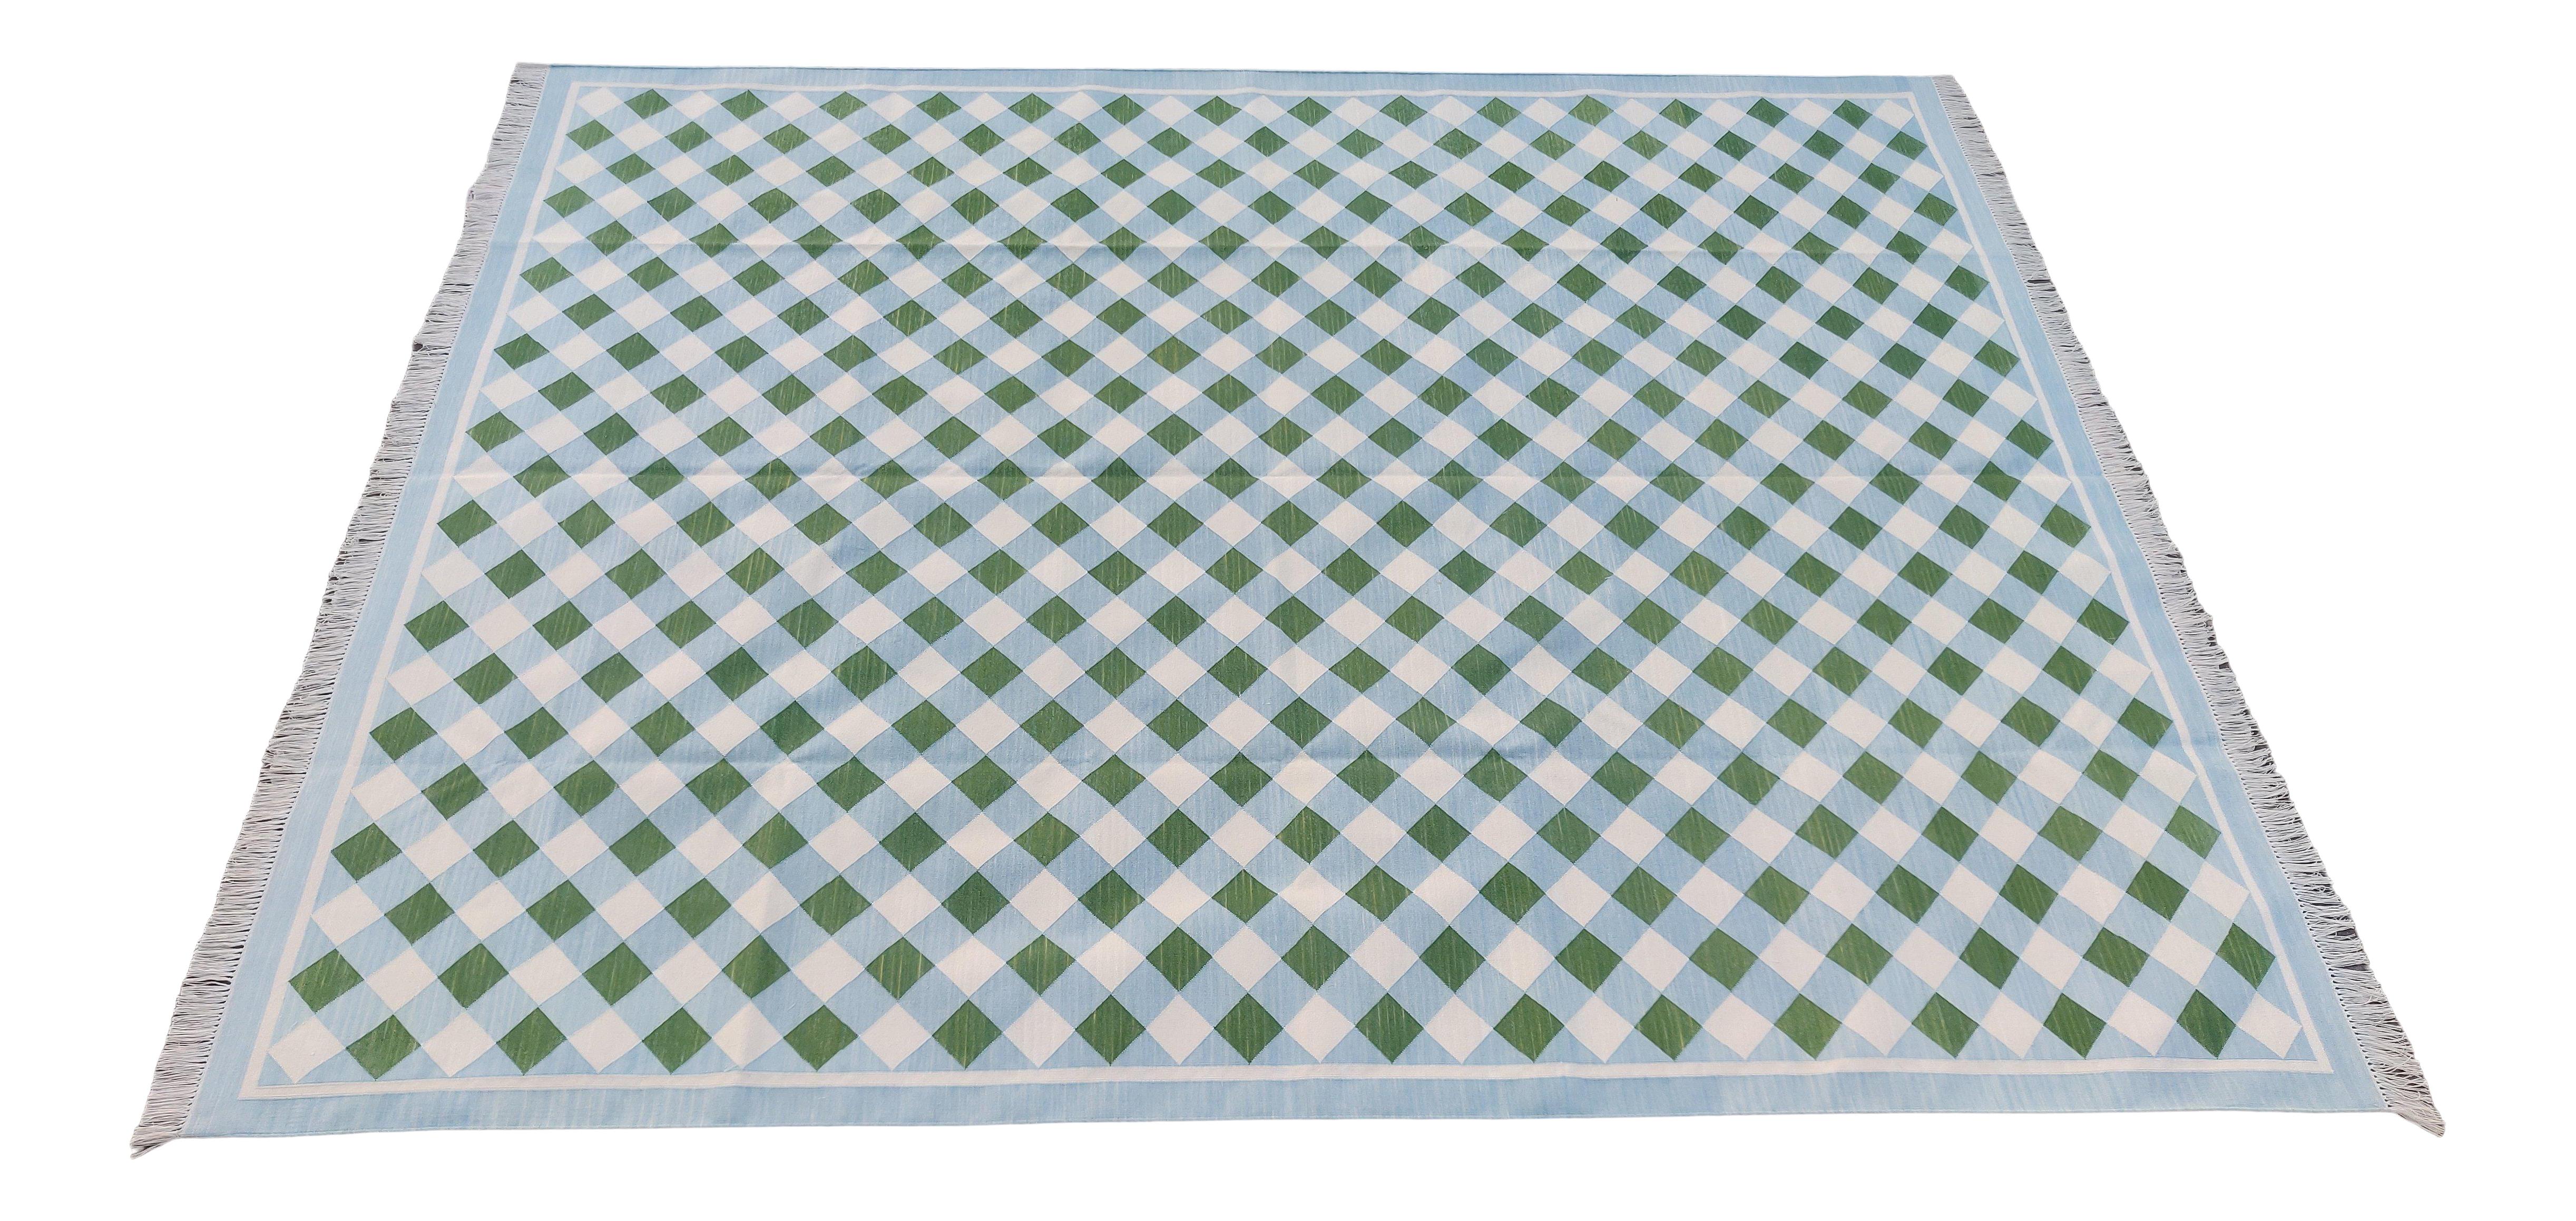 Hand-Woven Handmade Cotton Area Flat Weave Rug, 9x12 Green, Blue Checked Indian Dhurrie Rug